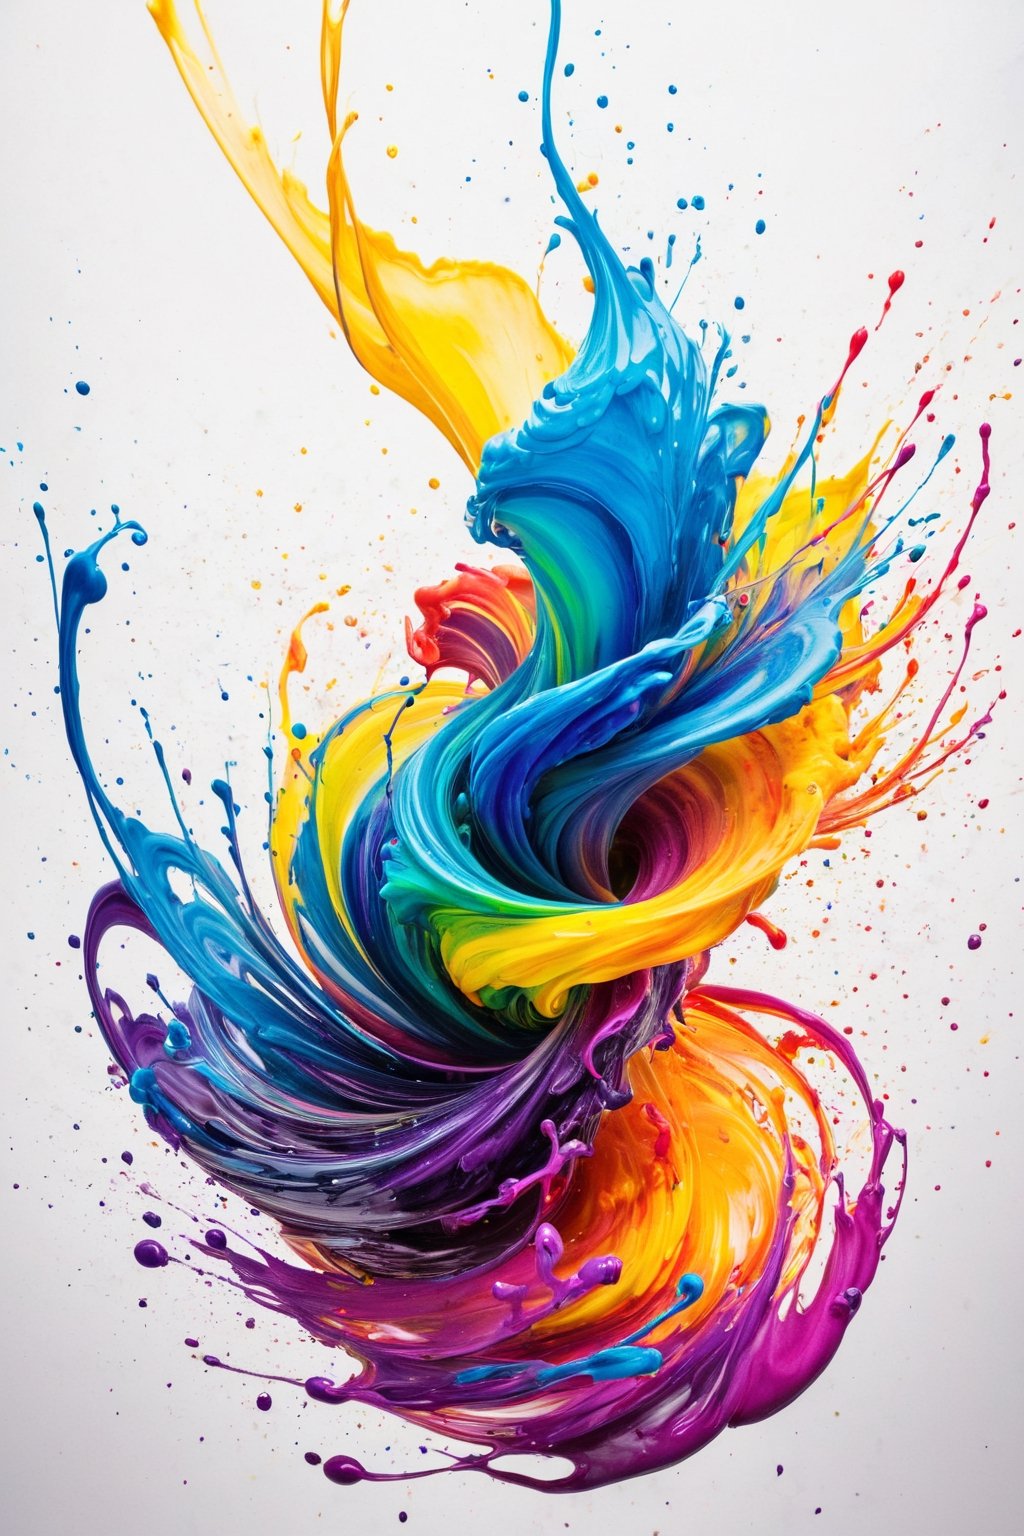 A swirling tornado of many bright ink colors